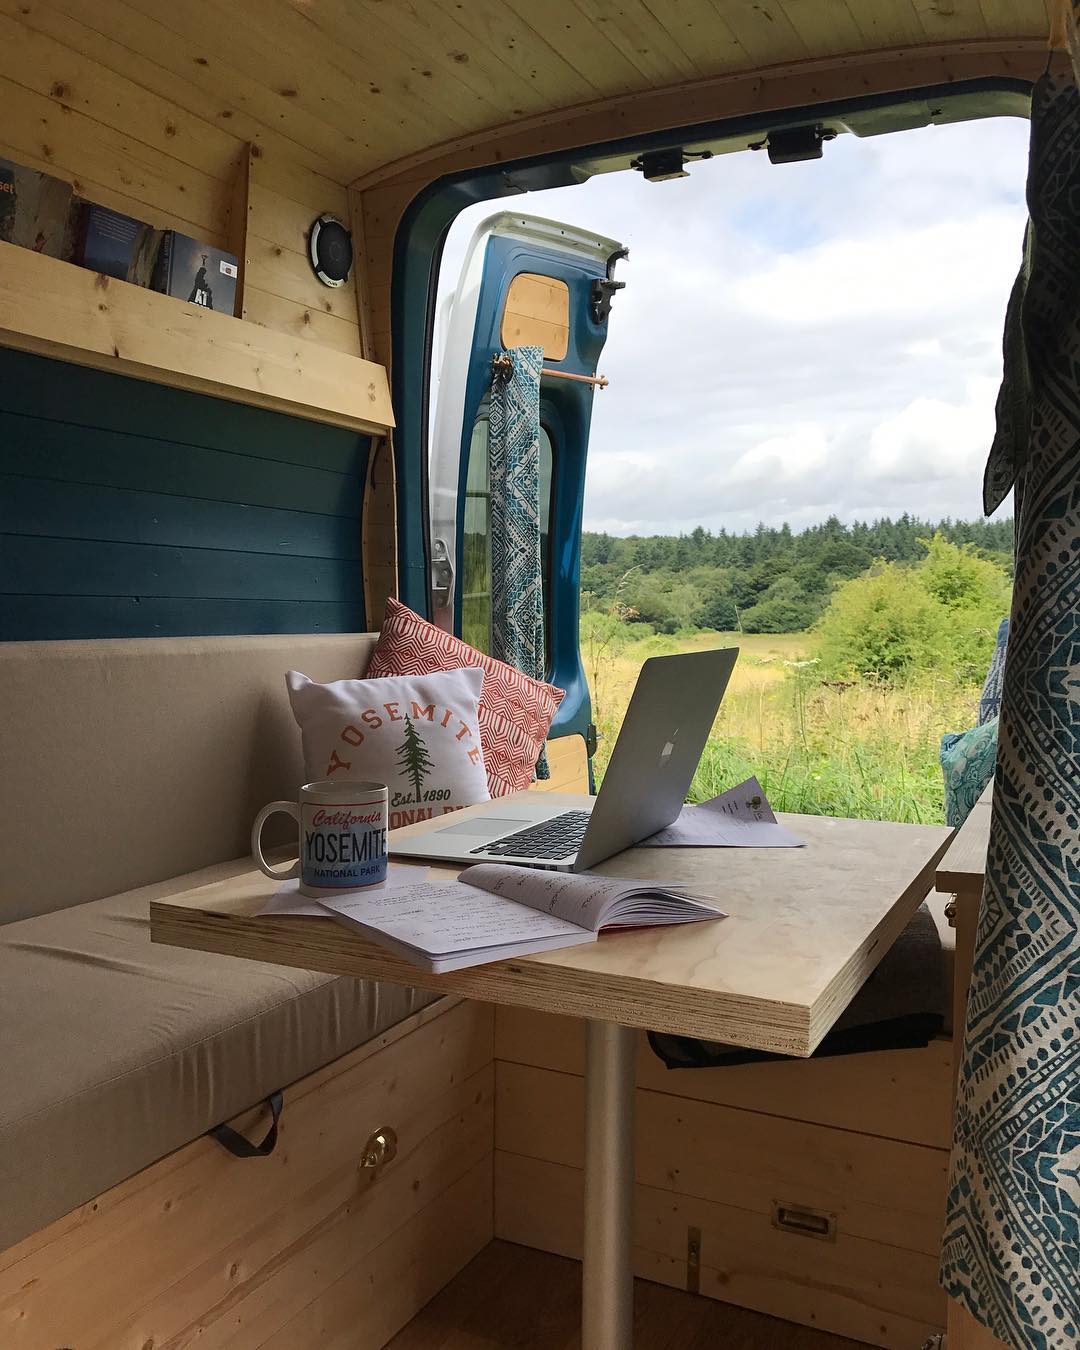 Working as a digital nomad and using a cell signal booster in a camper van conversion or RV